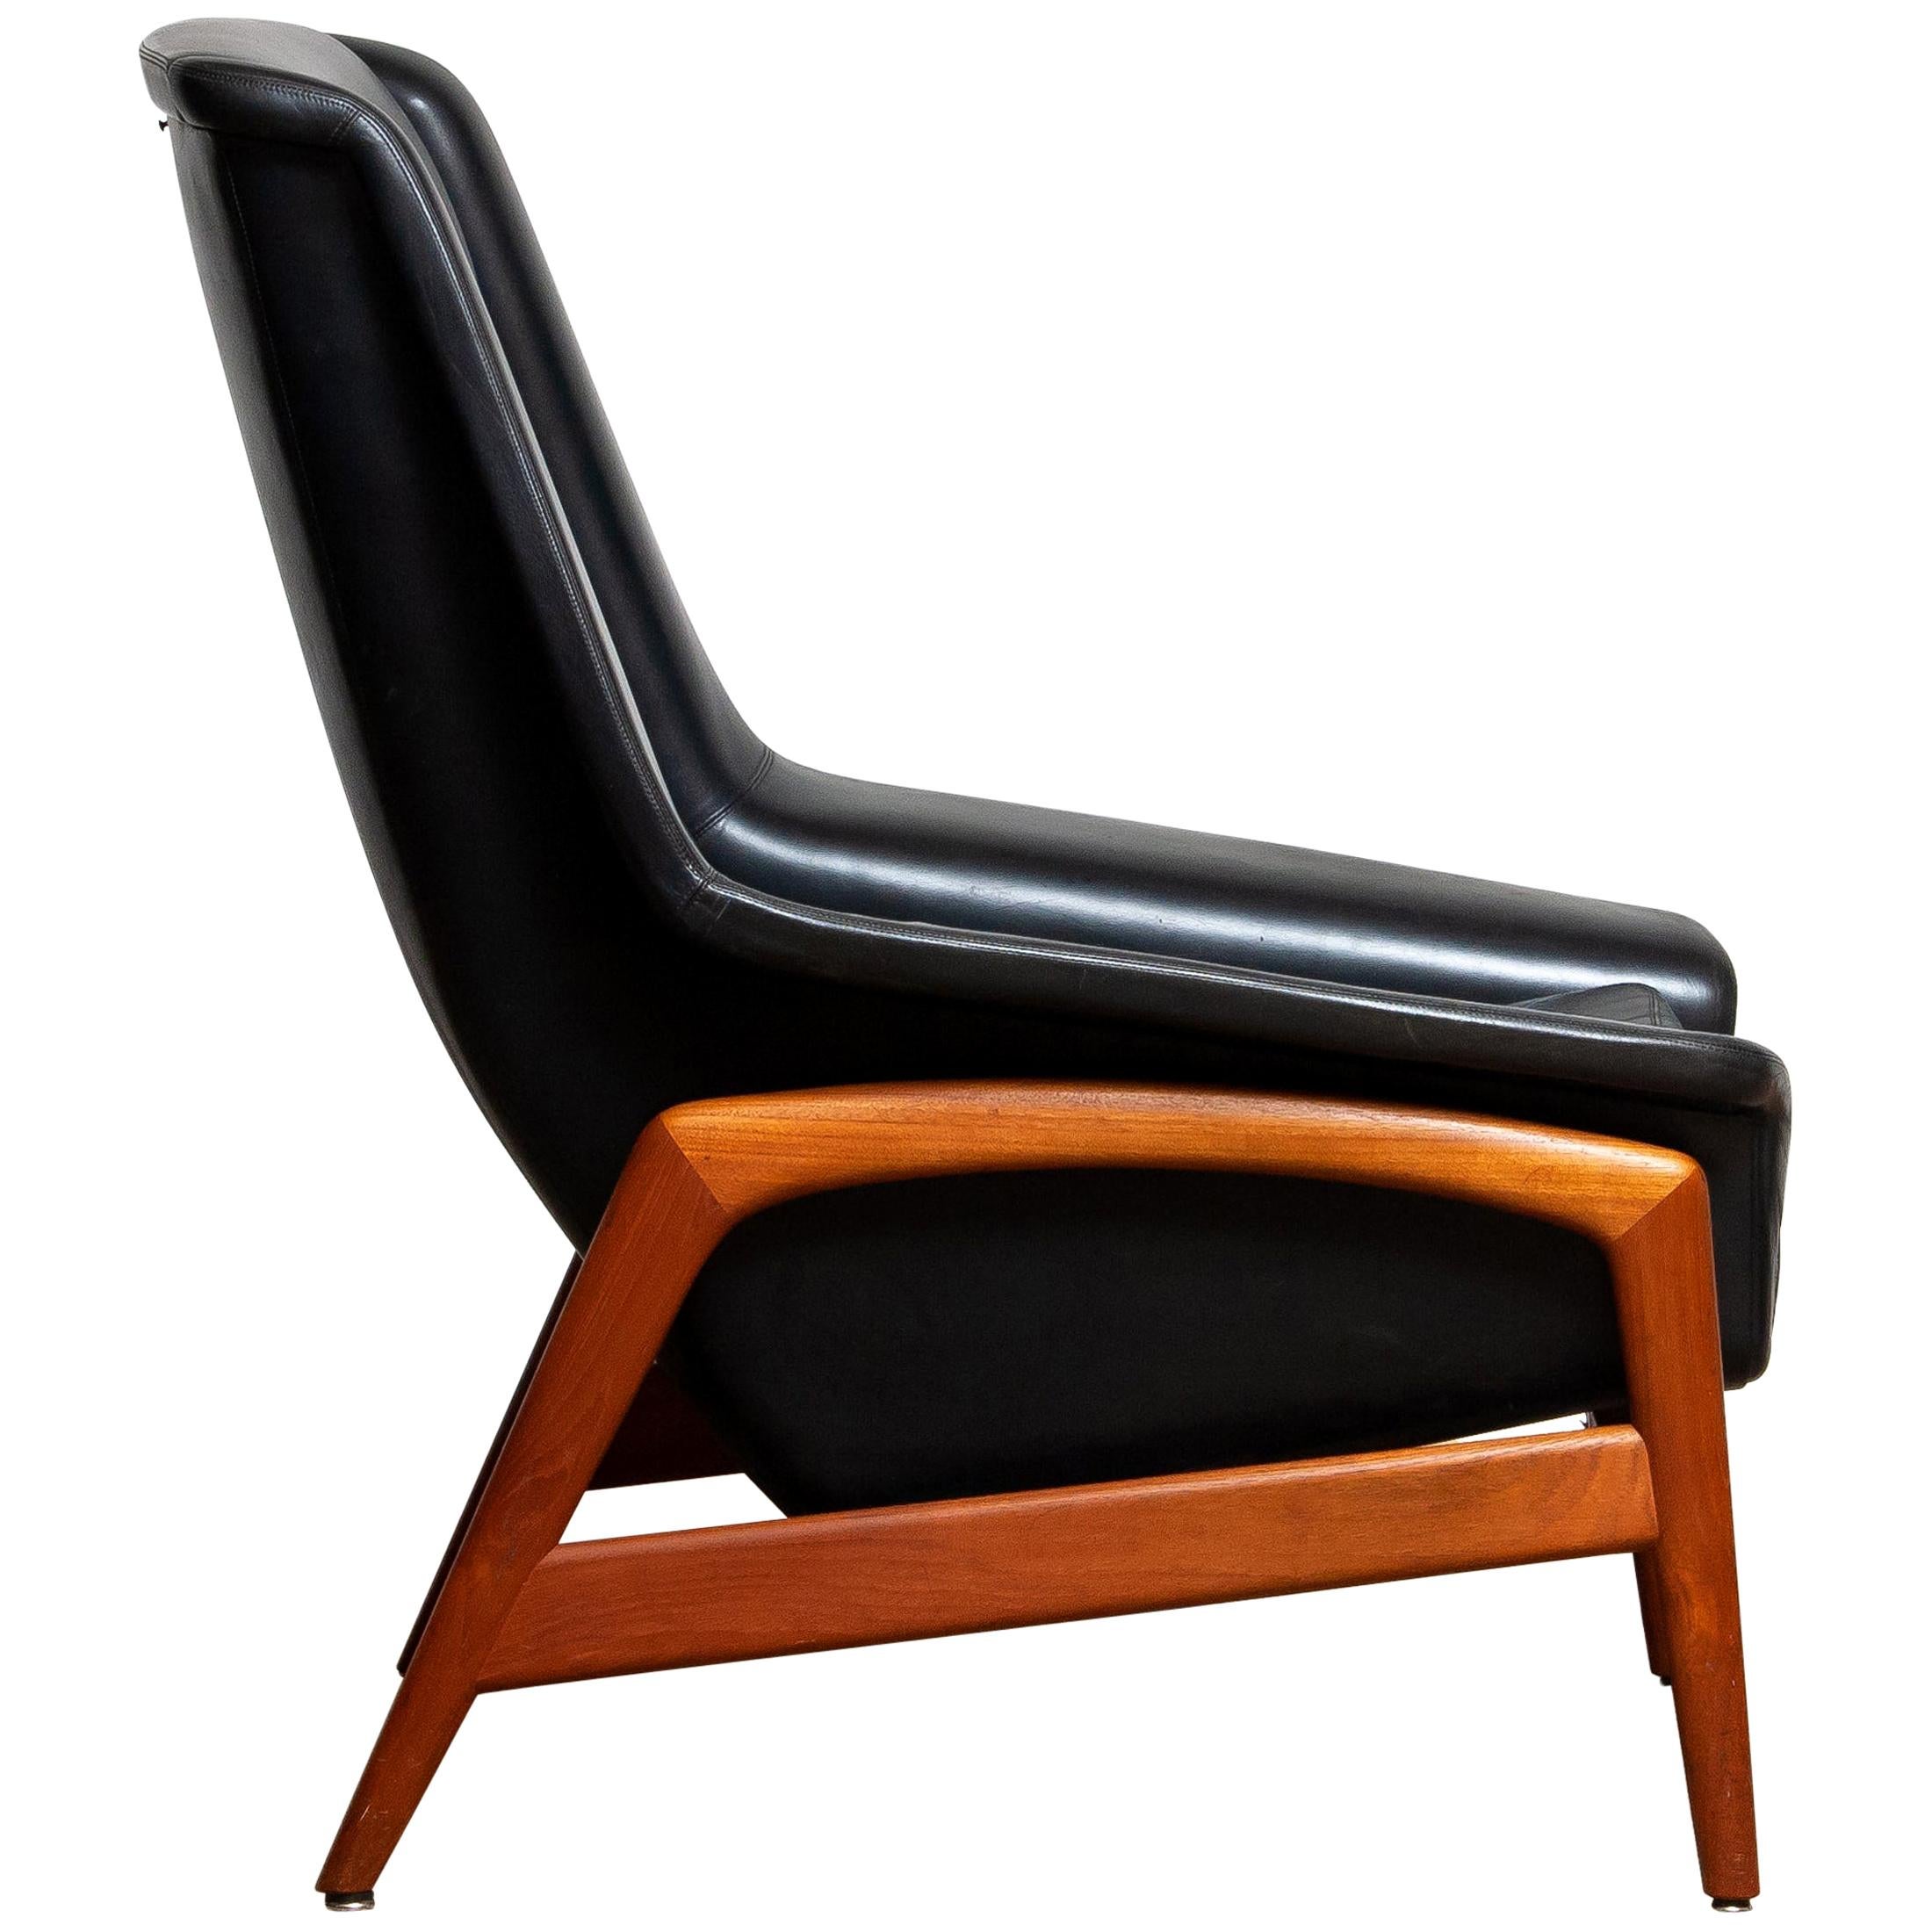 1960s, Lounge Chair 'Profil' by Folke Ohlsson for DUX in Leather and Teak 1